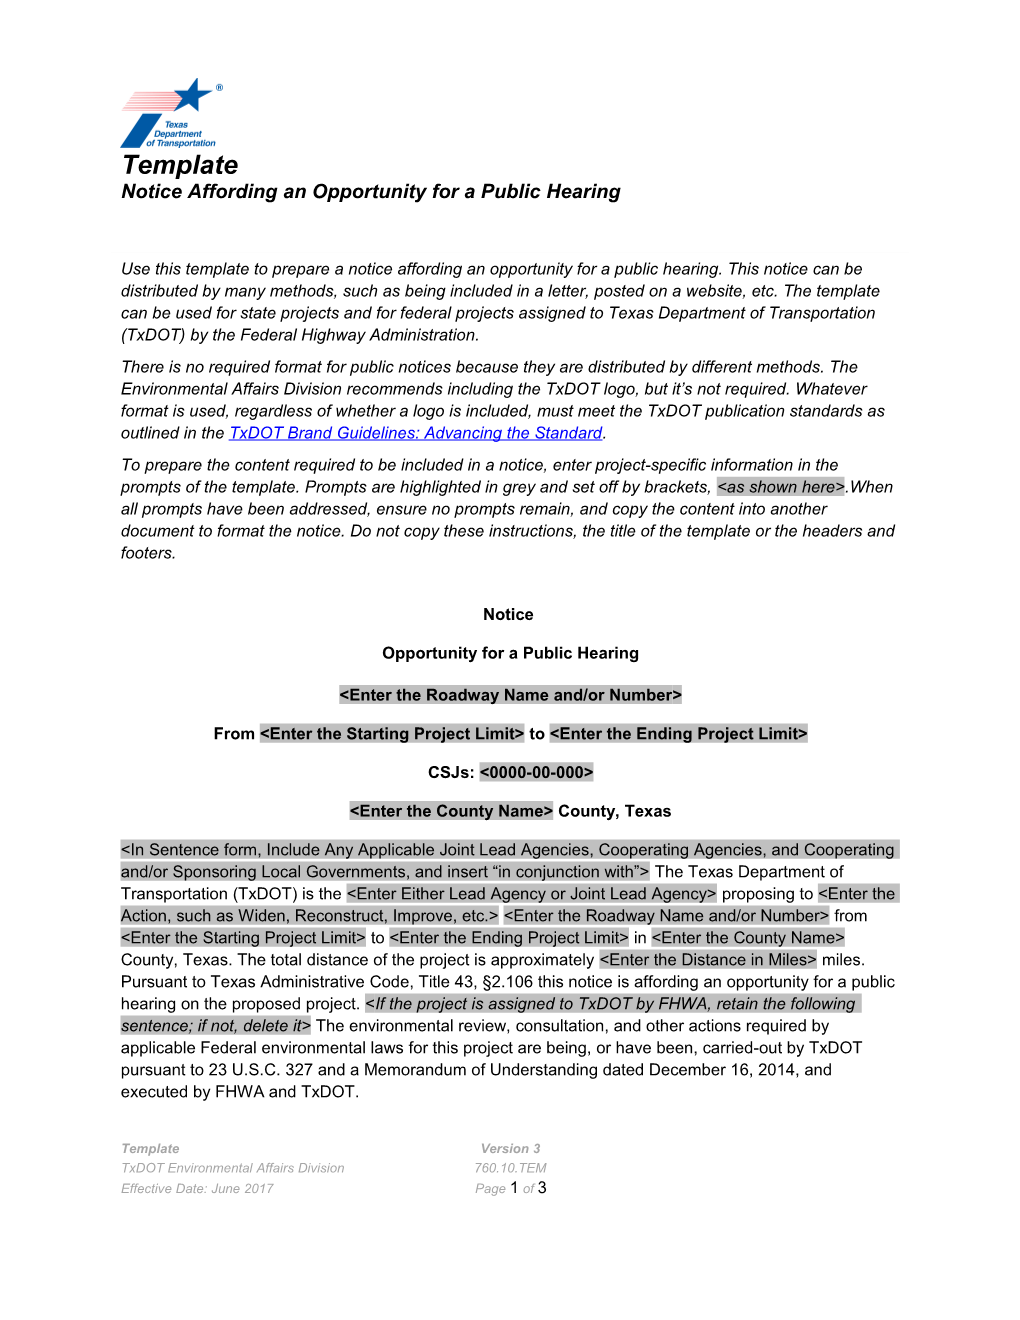 Template: Notice Affording an Opportunity for a Public Hearing